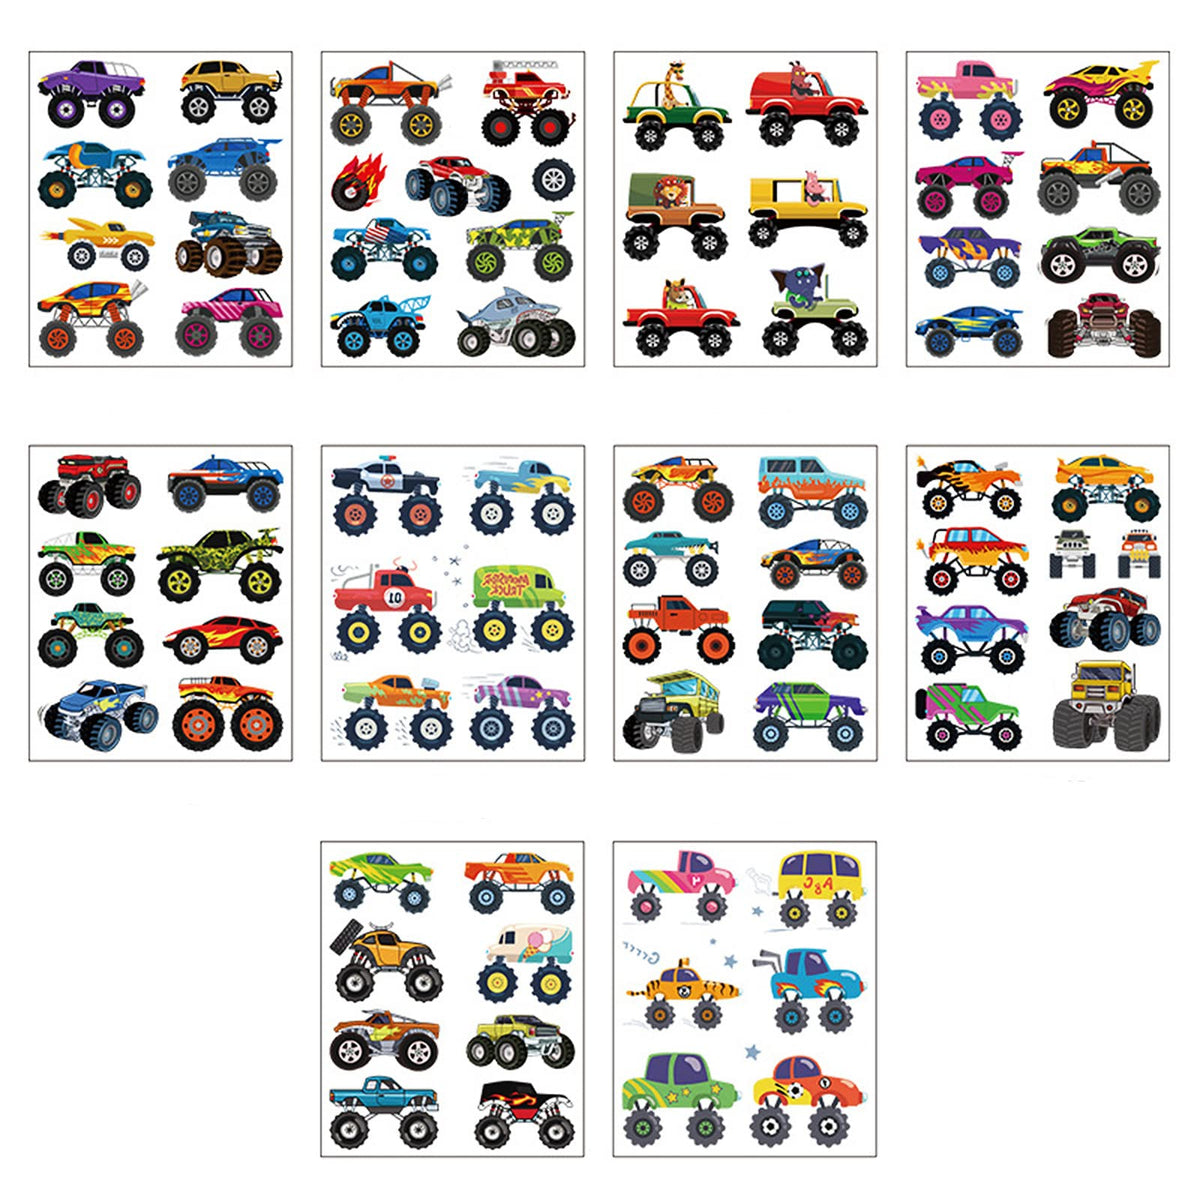 Monster Truck Car Temporary Tattoos for Boys,Girls,Kids,10 Sheets Kids Tattoos Waterproof Fake Tattoos Truck Car Tattoo Stickers for Children's Stick on Tattoos Car Theme Birthday Party Bag Filler